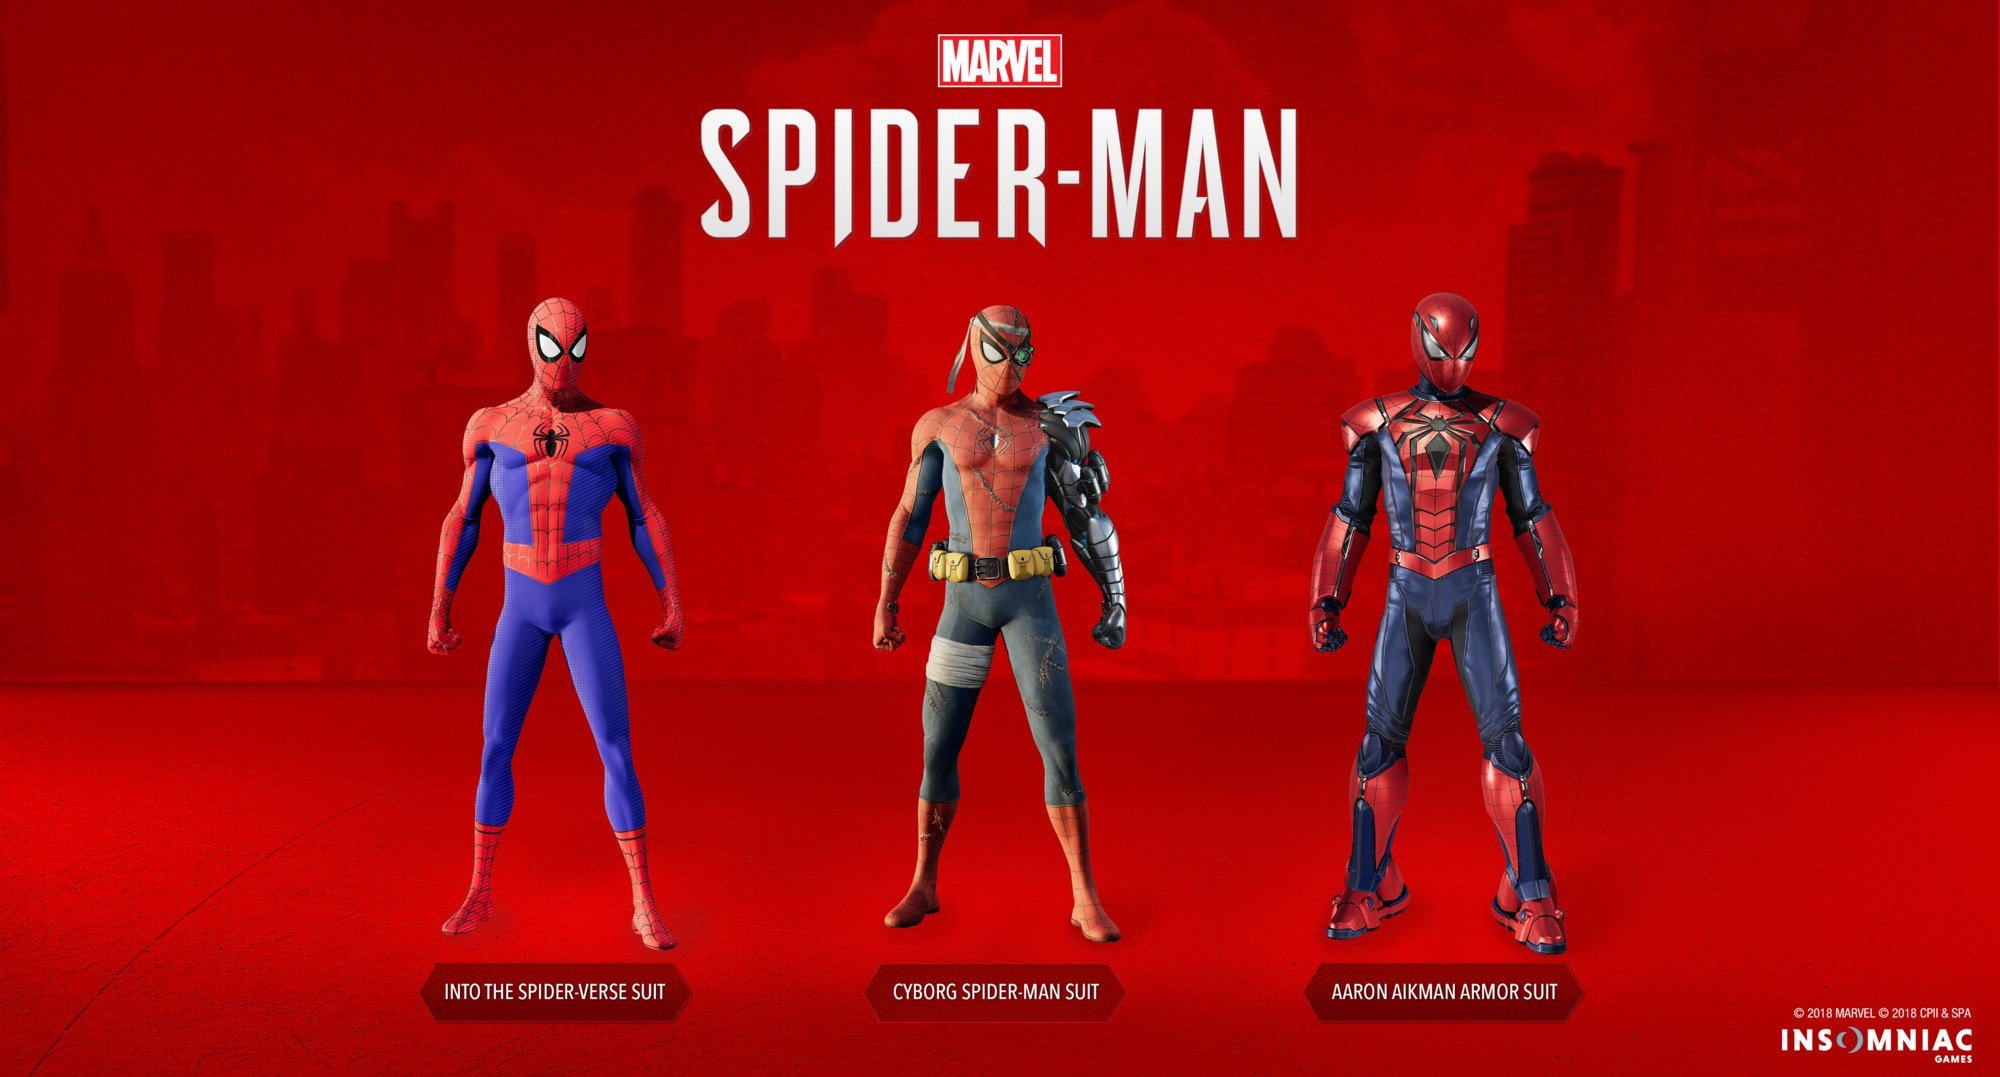 spider-man-ps4-s-final-dlc-adds-into-the-spider-verse-suit-push-square